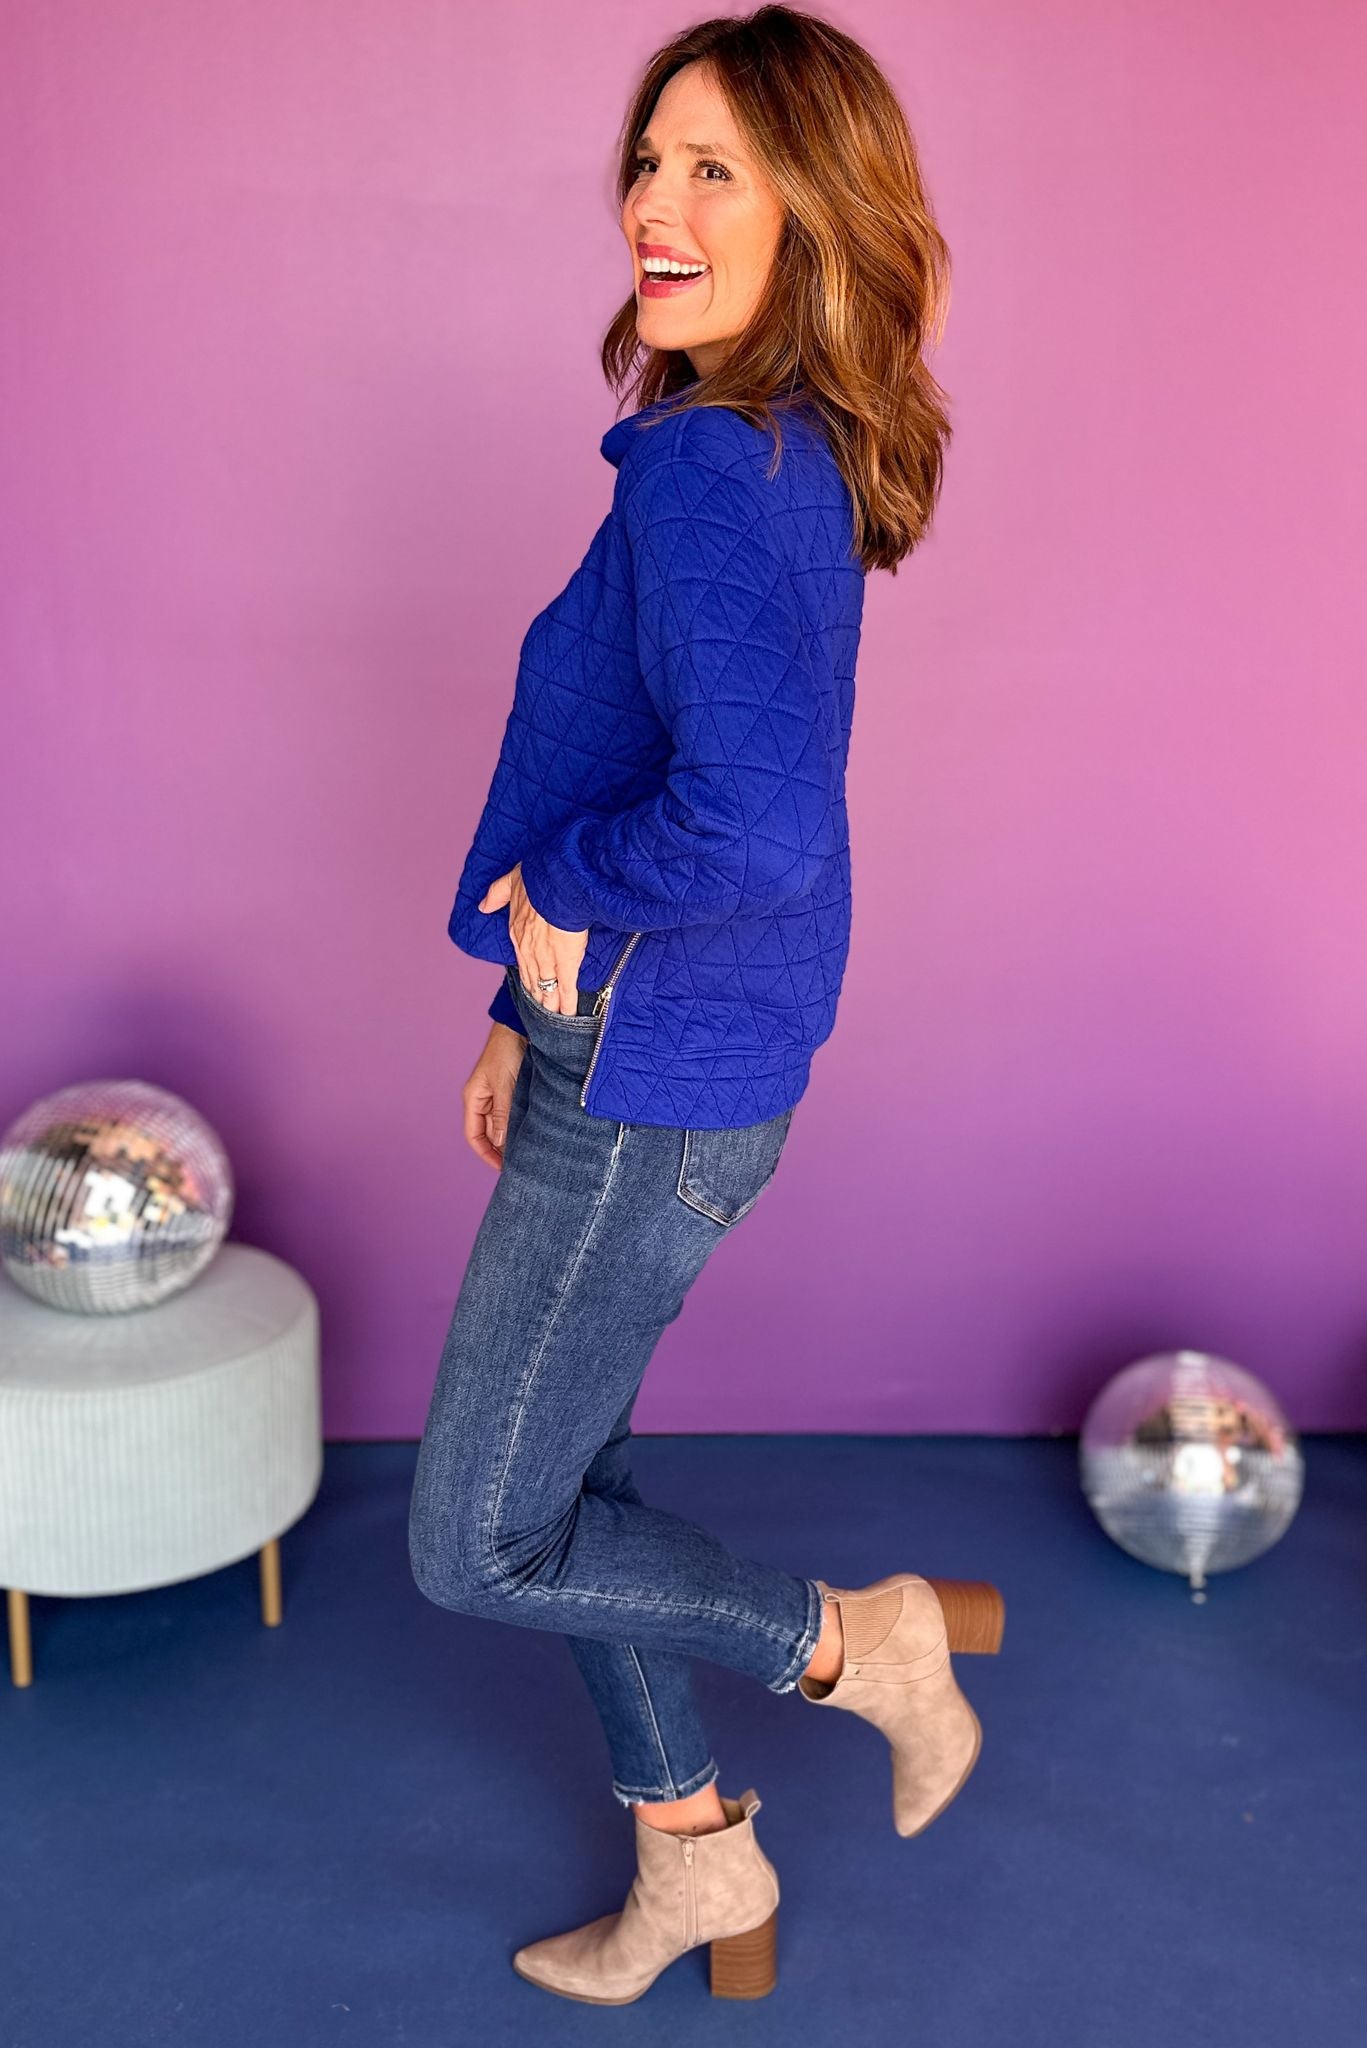 SSYS The Ava Top In Royal, ssys the label, ssys pullover, must have pullover, must have style, must have fall, fall fashion, fall style, elevated style, elevated pullover, mom style, quilted style, shop style your senses by mallory fitzsimmons